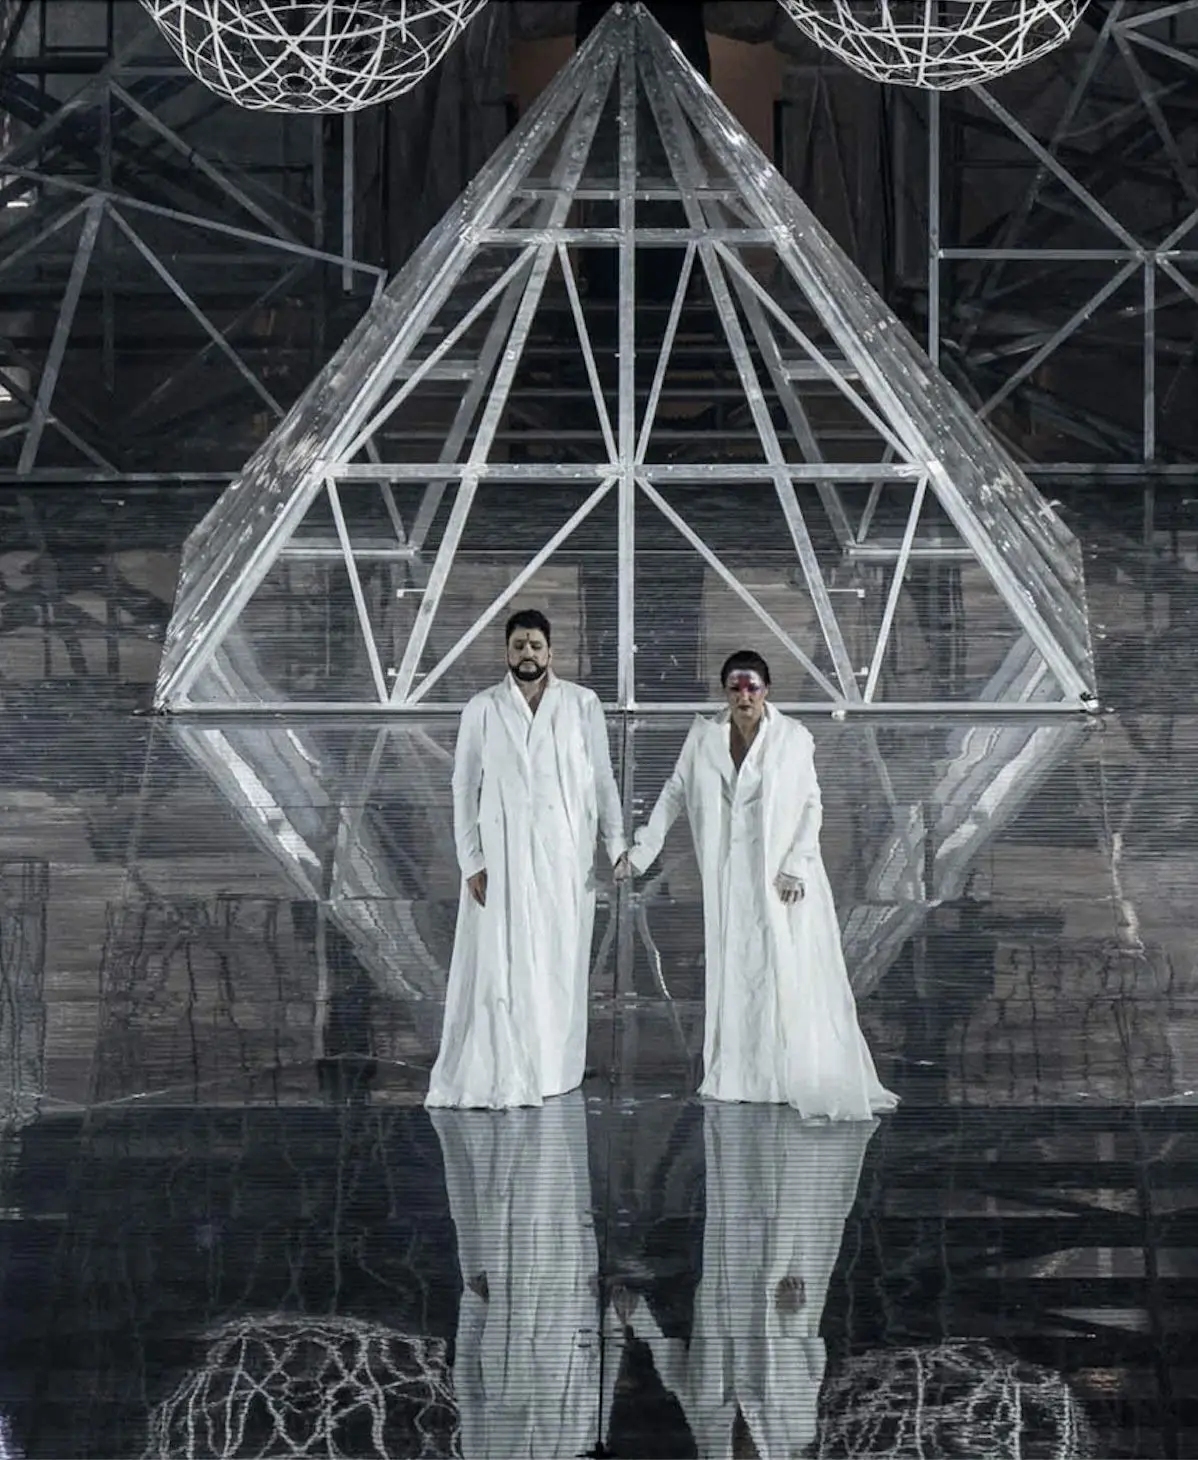 Aida and Radamès, Act IV. They are standing at the center of the stage in front of the pyramid and are holding hands. They are wearing loose fitting white robes that are floor length and open in the front. Underneath, both are wearing floor length garments made of the same color. Aida has her hair pulled back and held in place by a chignon on the nape of her neck. On her forehead, she is wearing light red and purple makeup covered with multicolored glitter. Radamès has short black hair and a beard. At the center of his forehead is a small black line.